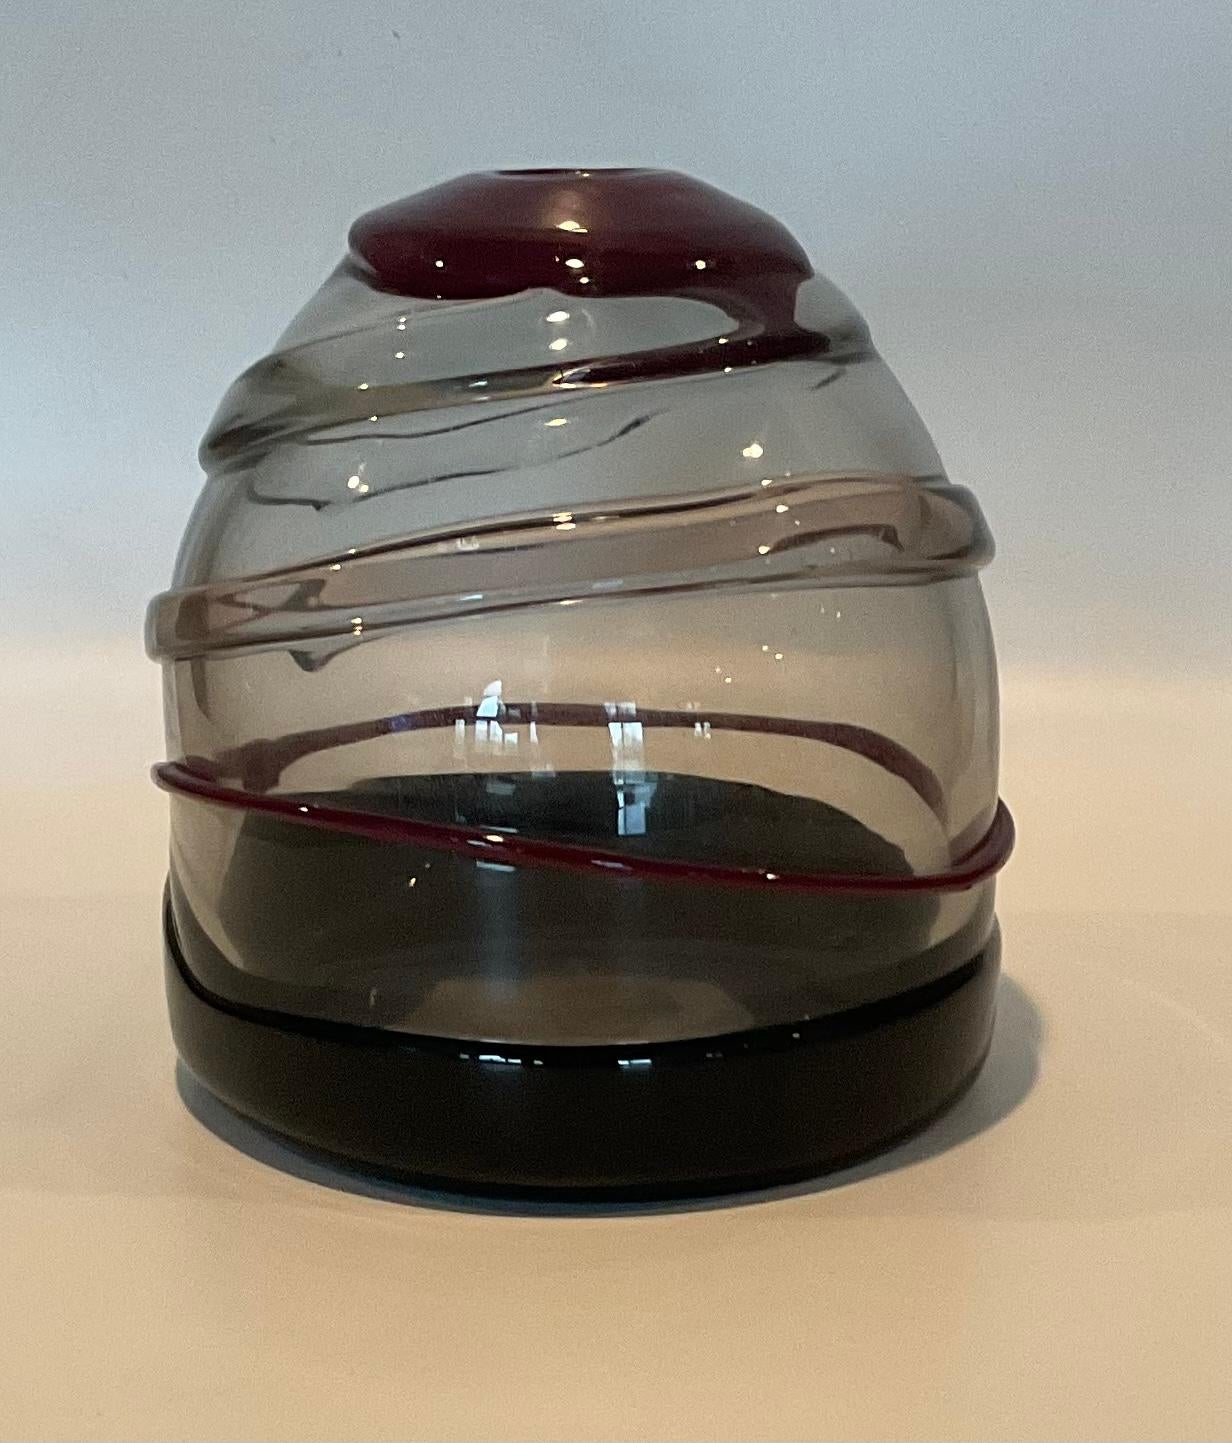 Vintage Murano Sasso glass vase by Luciano Gaspari for Salviati & C. circa. 1960s. A heavy vintage glass vase designed by Luciano Gaspari for Salviati & C. in the 1960s. Signed as shown with original label. The design was first presented at the